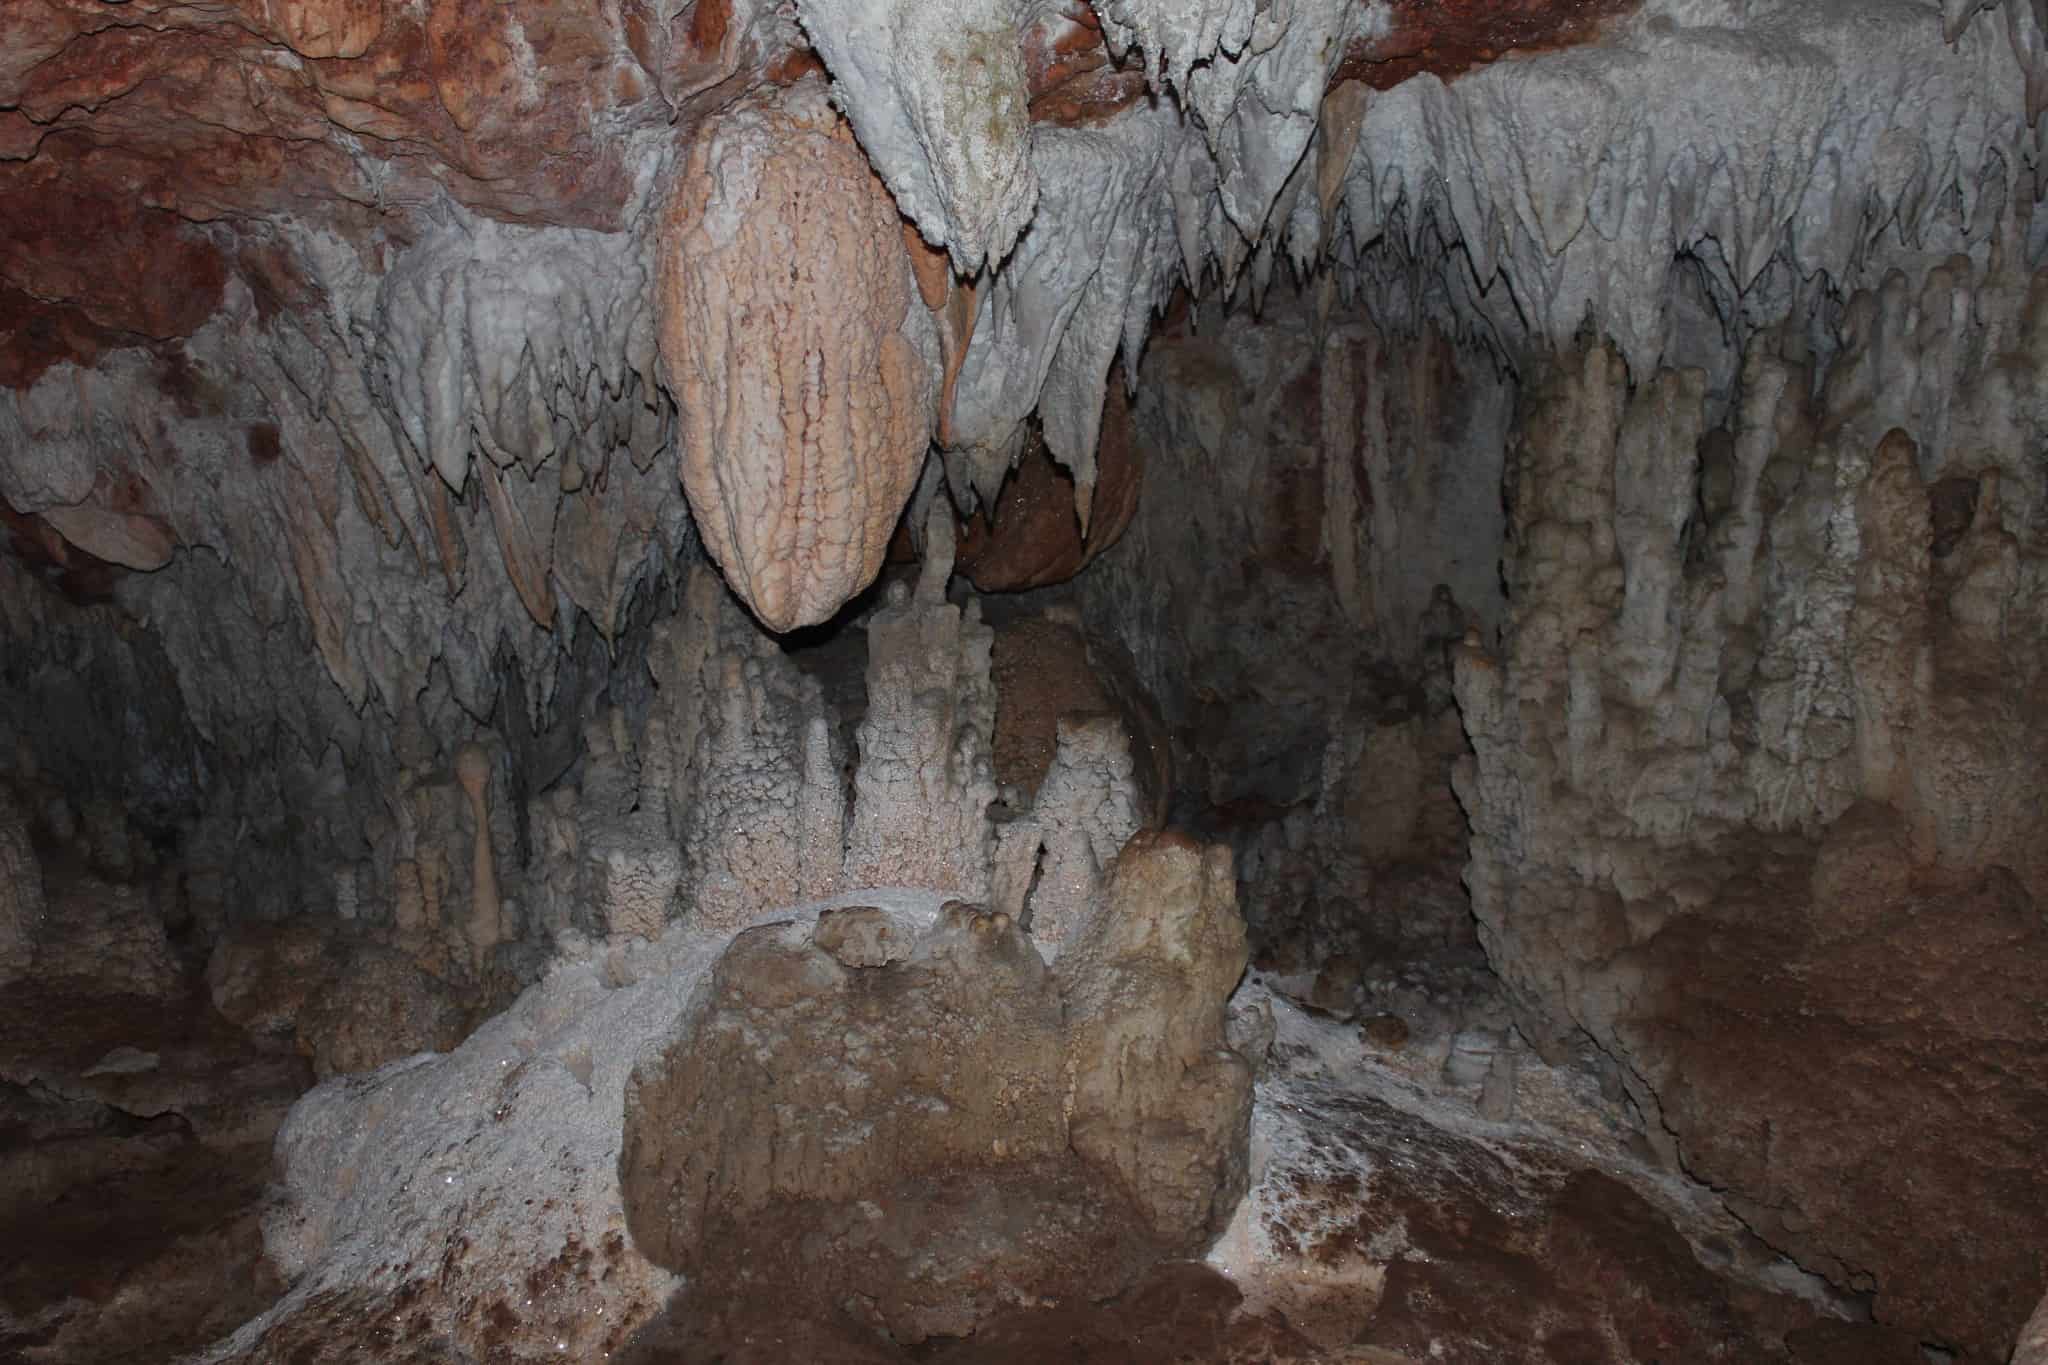 Geologic formations in St Herman's Cave